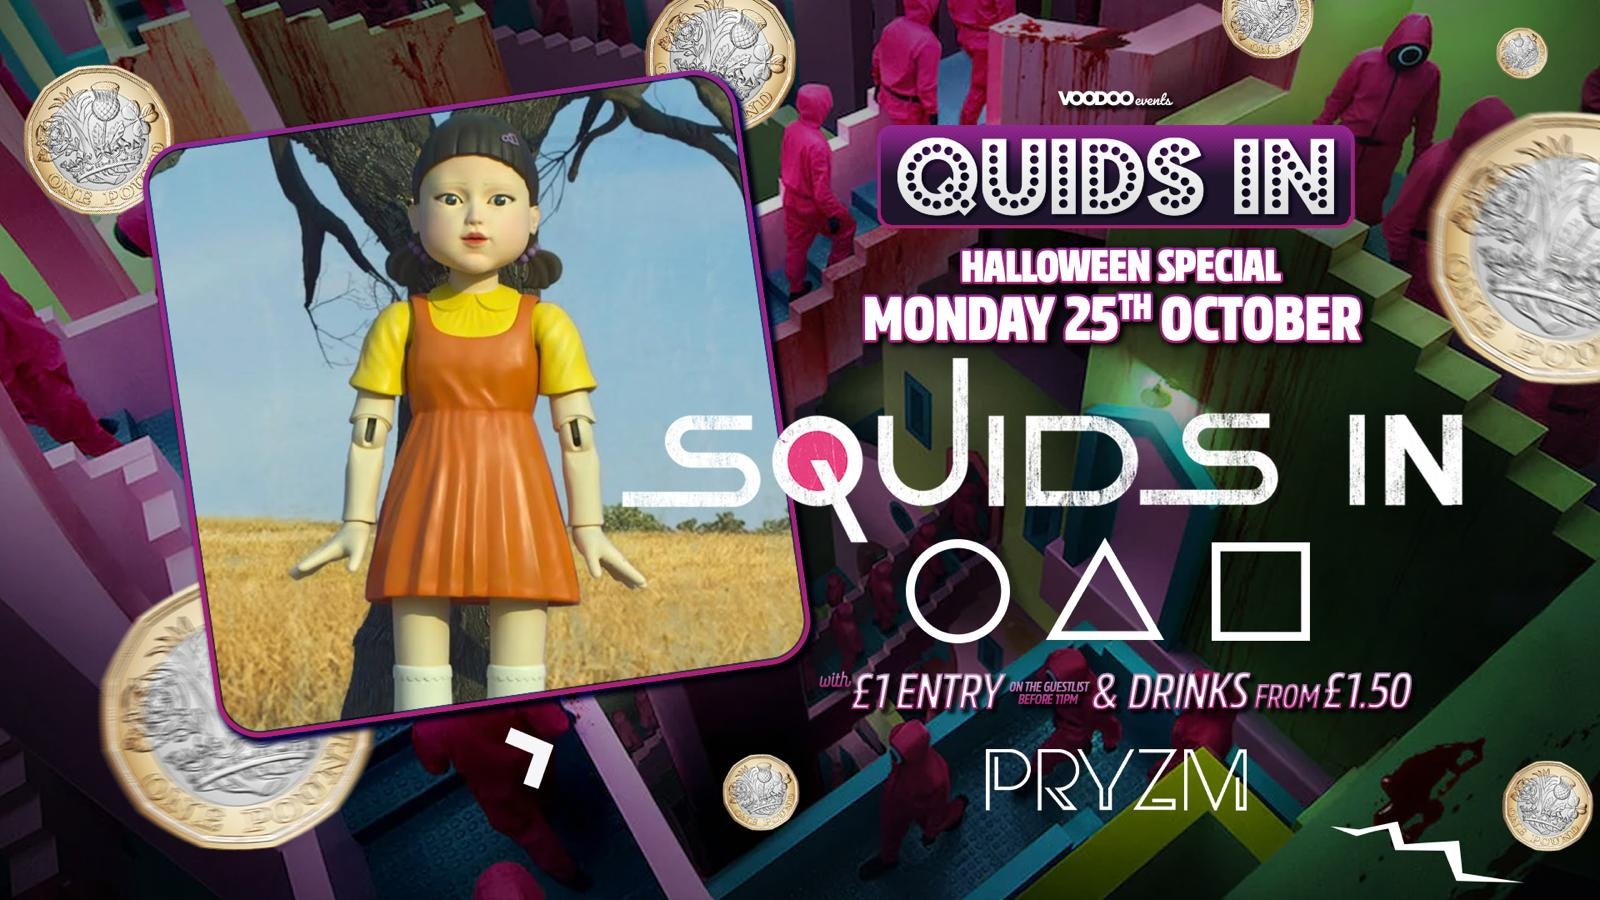 Squids In at PRYZM Halloween Special – 25th October